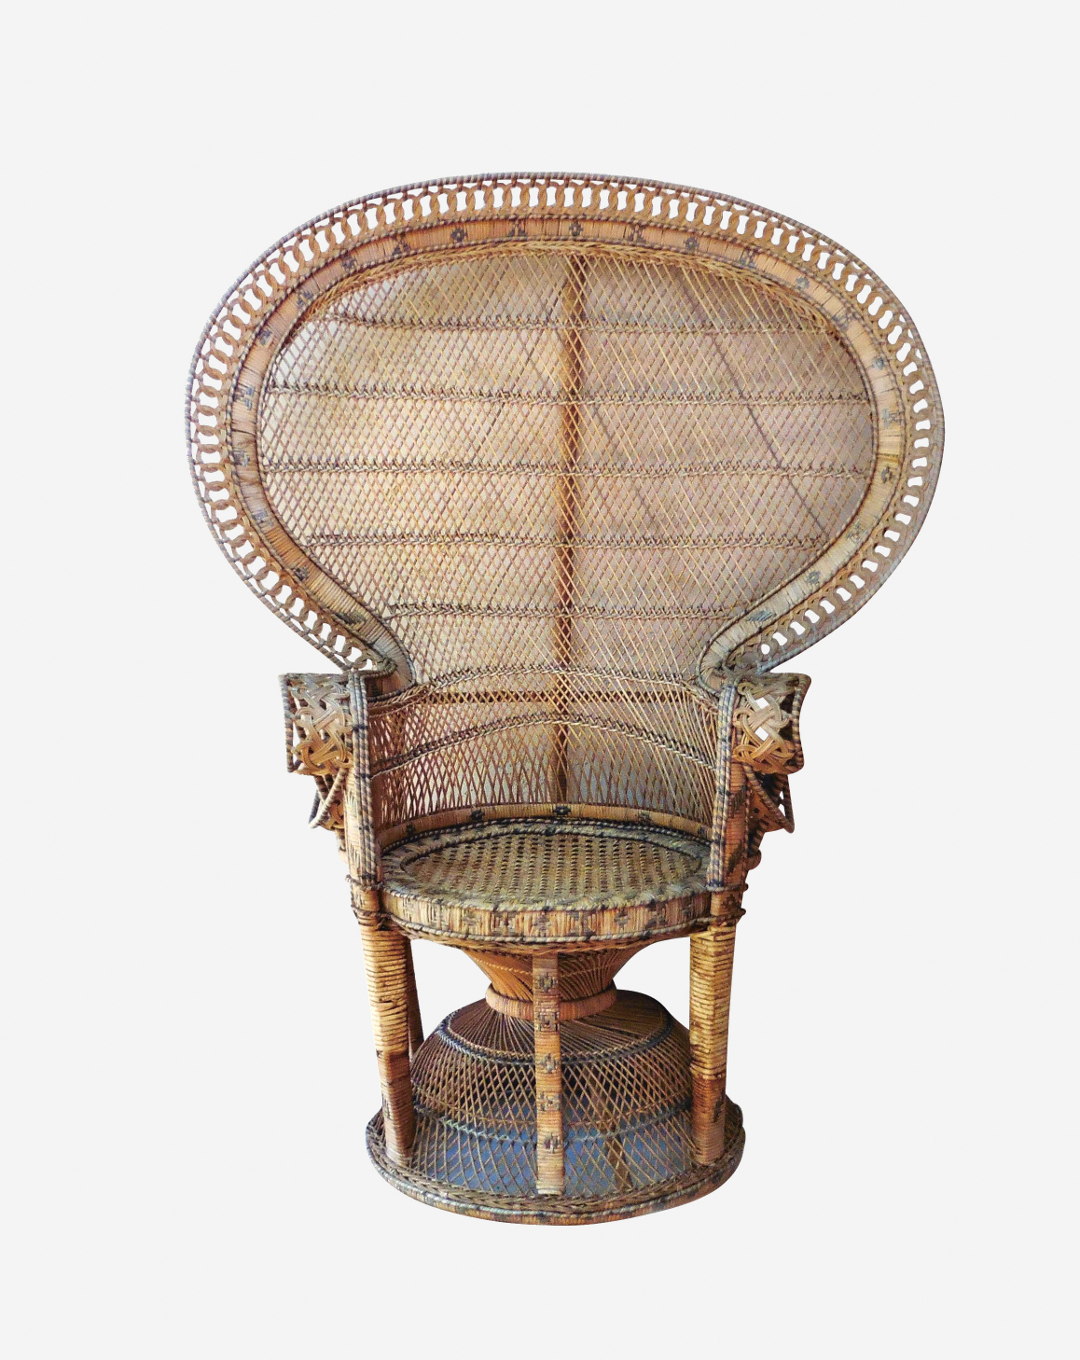 Peacock Chair, designer unknown, early 1900s, as featured in Chair: 500 Designs that Matter 